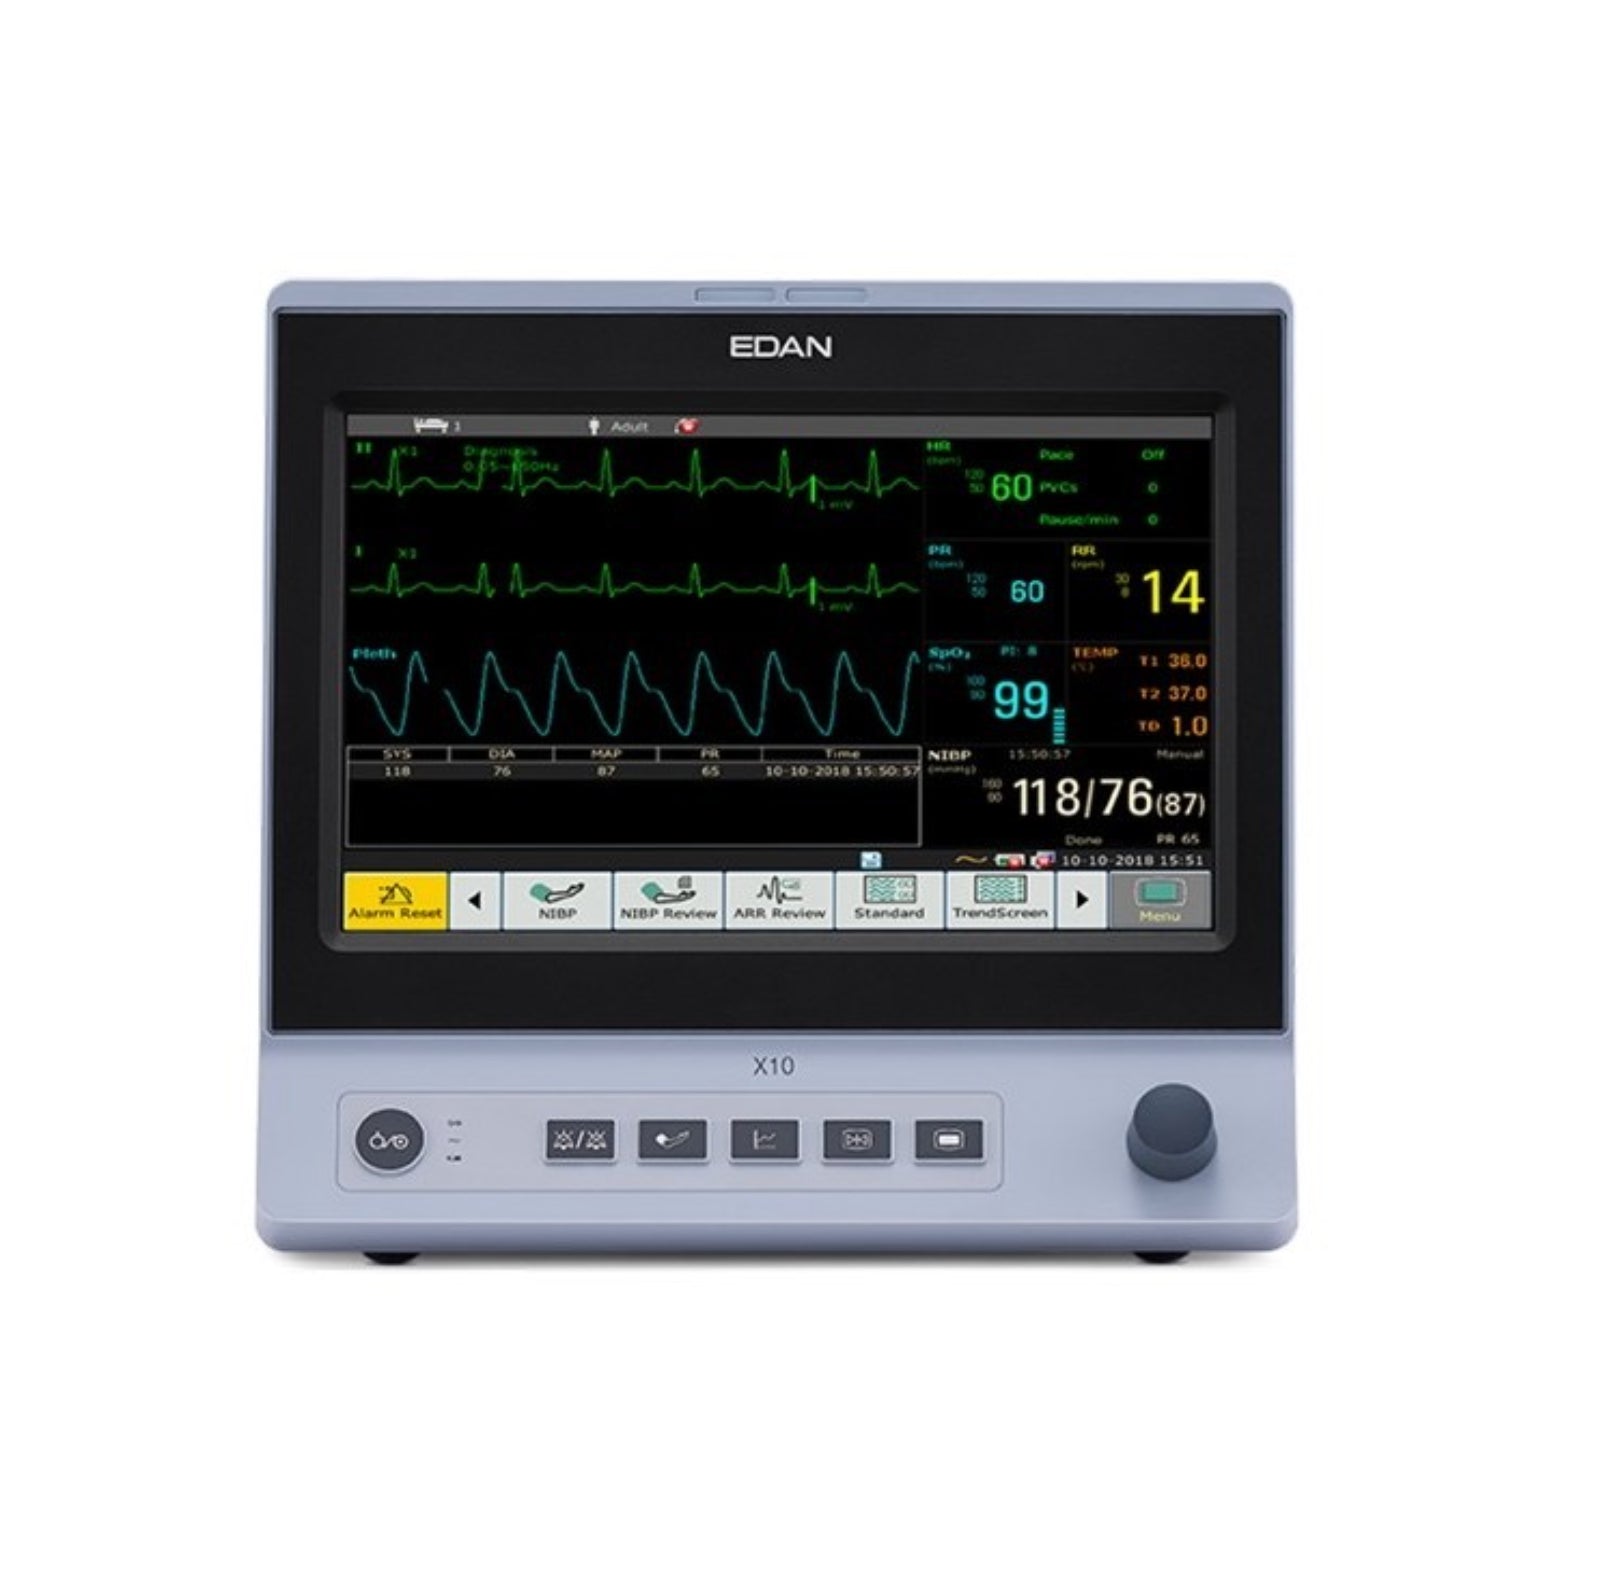 10.1 Inch LCD Edan X10 Touch Screen Monitor With Capnography - Pet medical equipment